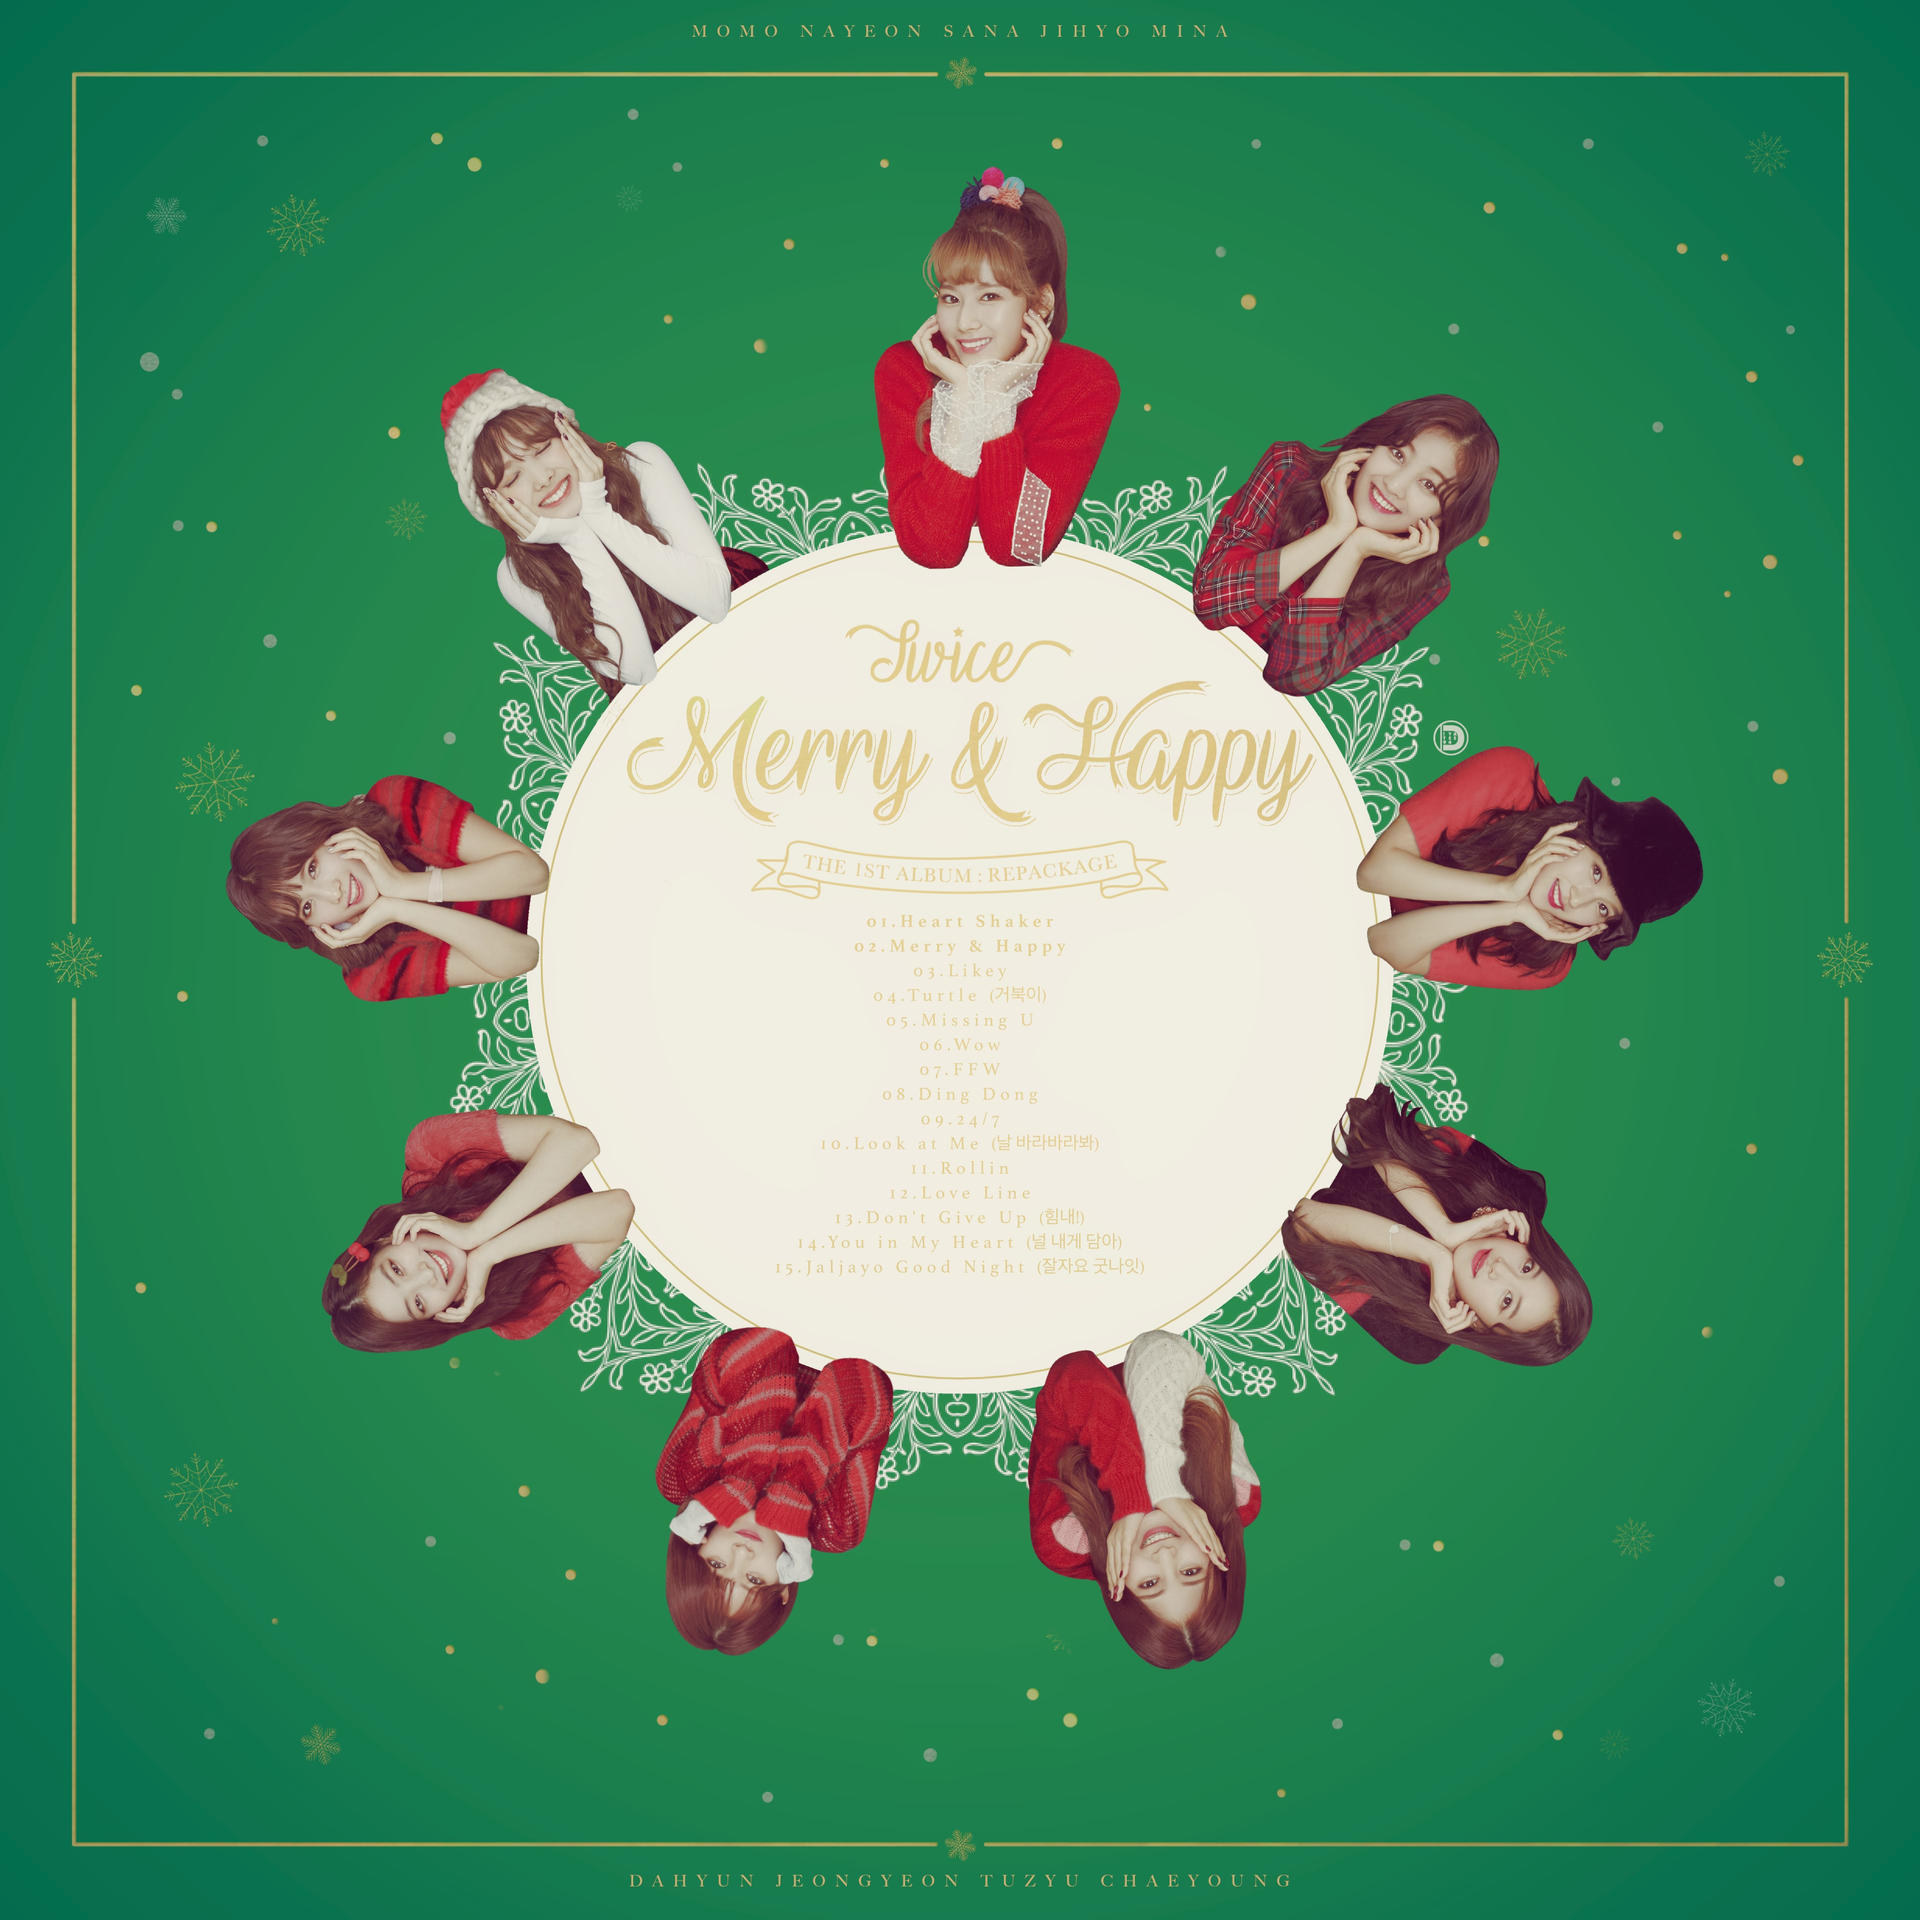 Twice Merry And Happy By Diyeah9tee4 On Deviantart